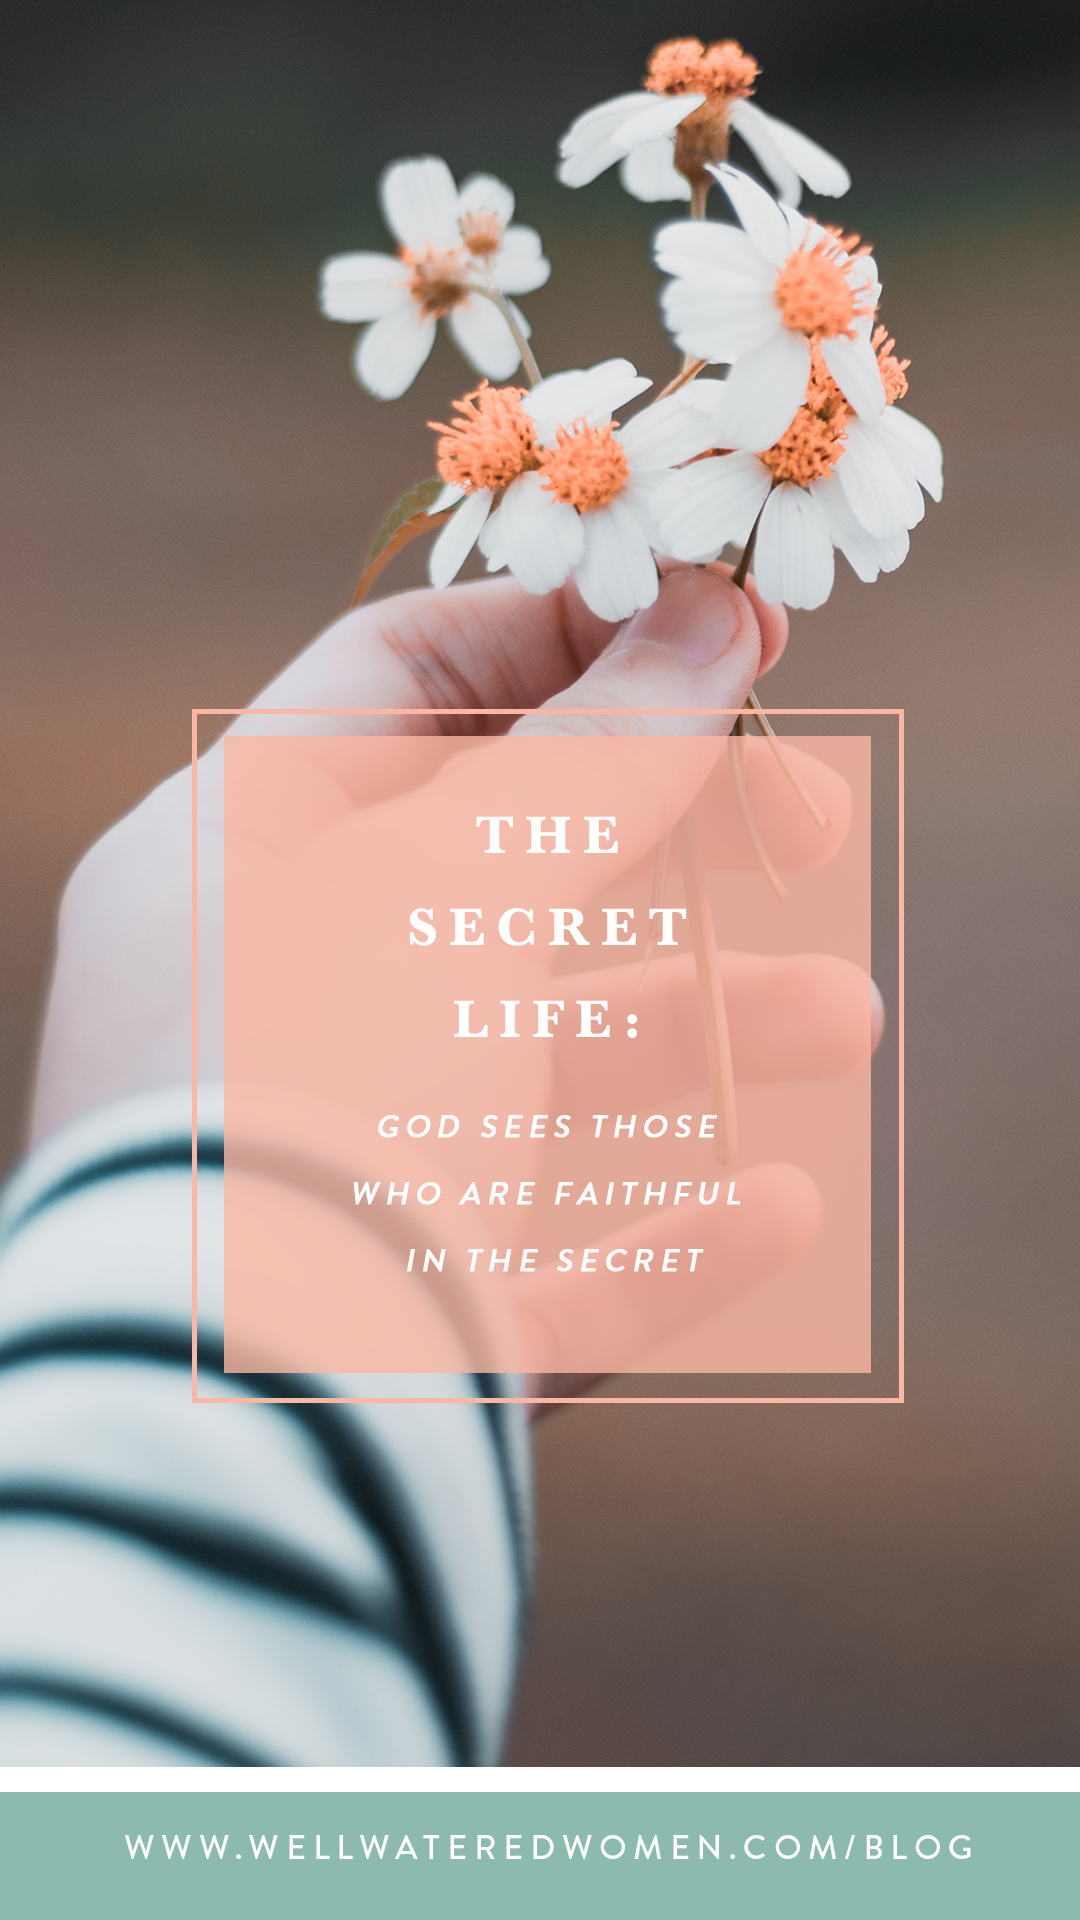 The Secret Life: God SEES those who are faithful in the secret.